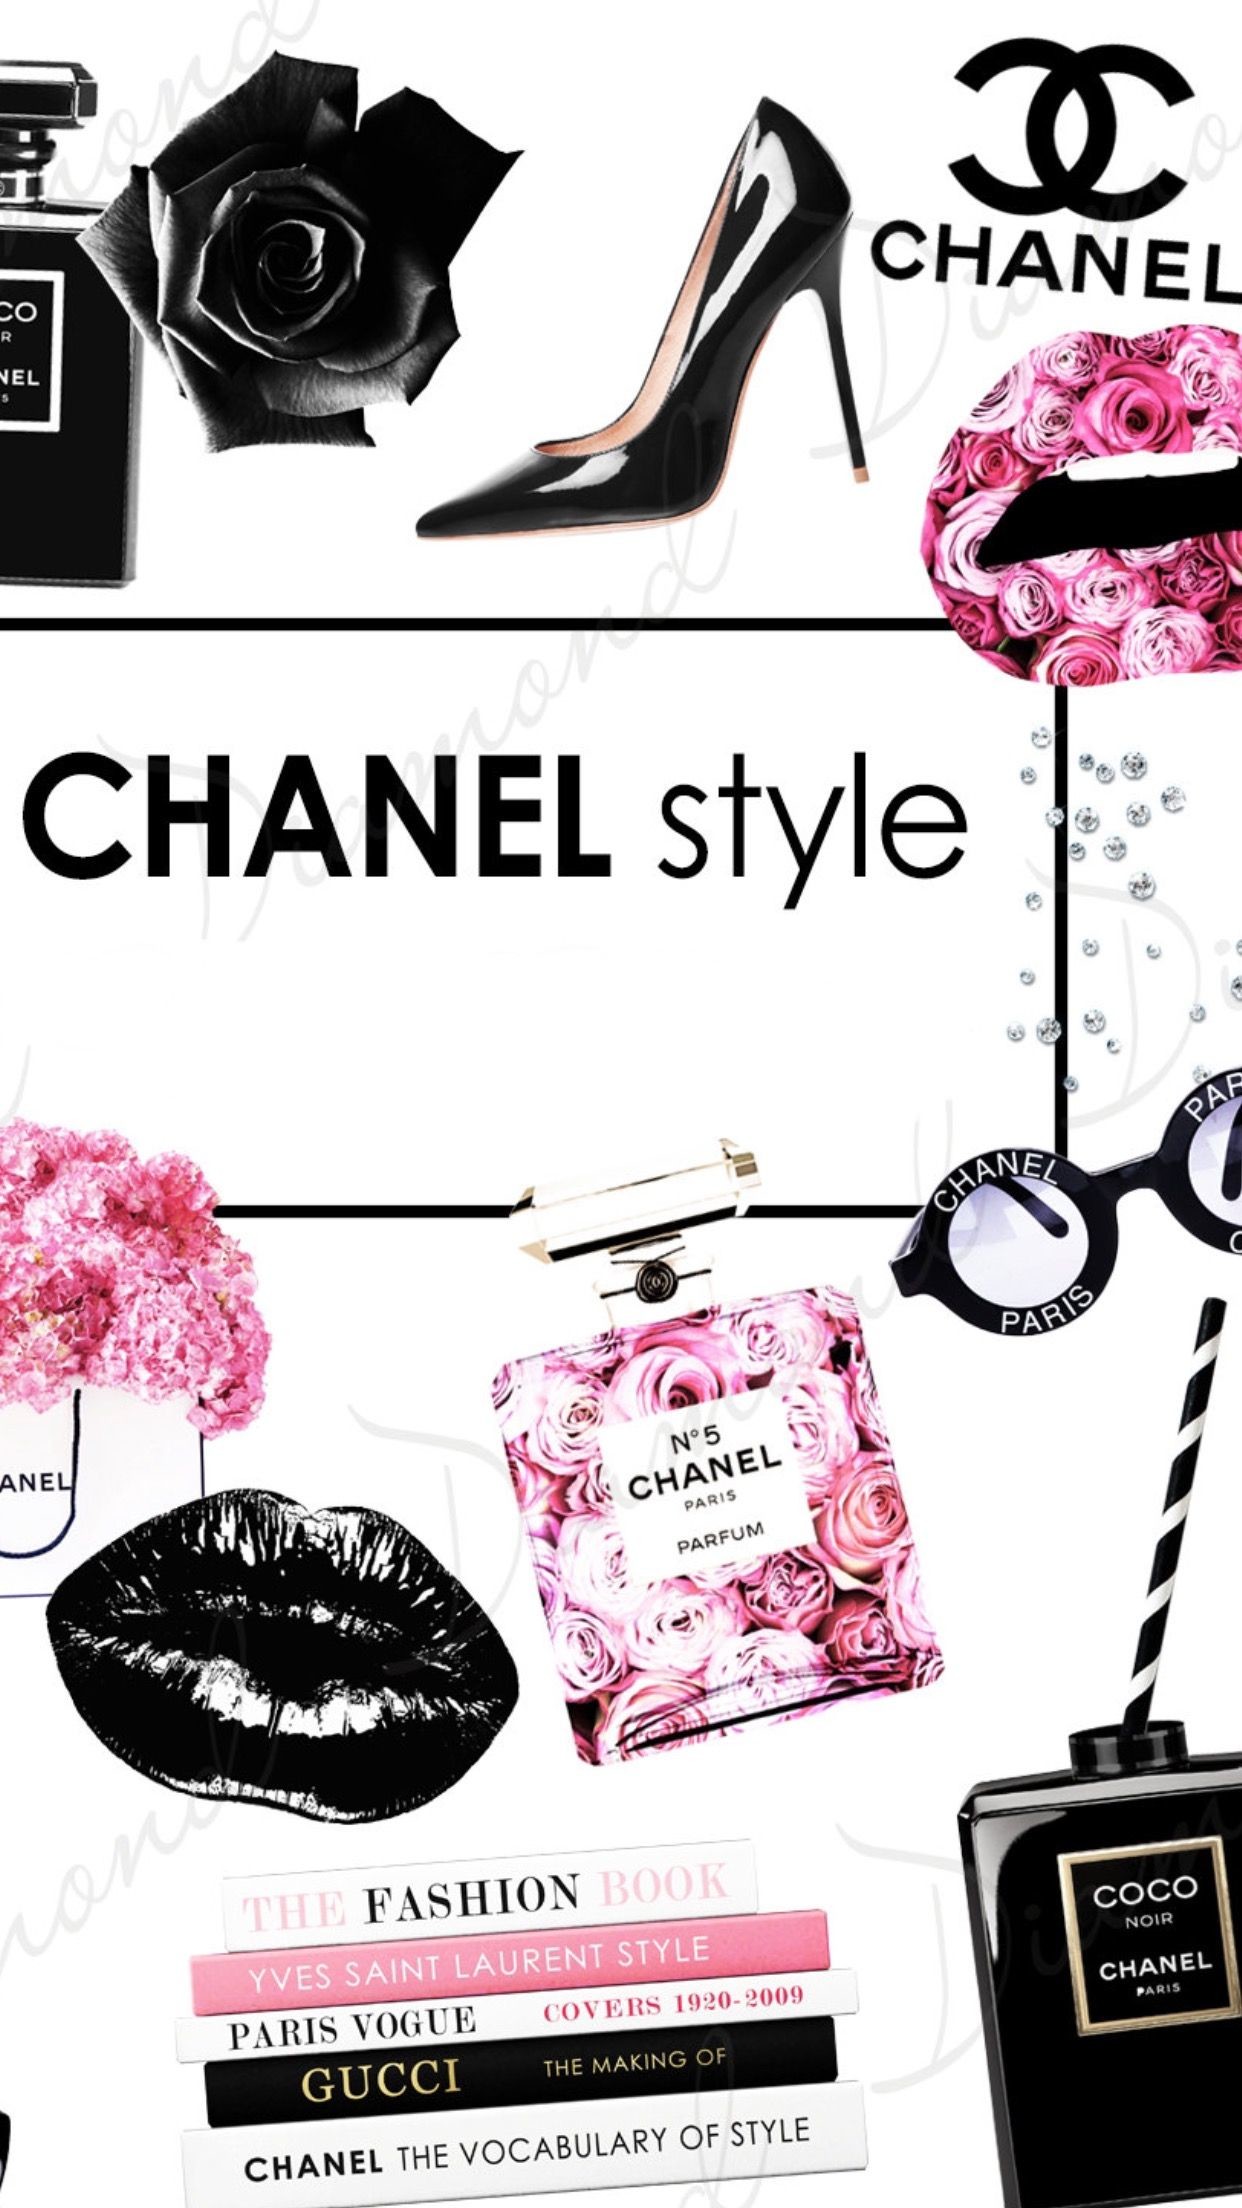 Featured image of post Coco Chanel Wallpaper Backgrounds Free iphone wallpapers free backgrounds free phone wallpaper free iphone backgrounds free downloads freebies chanel wallpaper chanel wallpapers free chanel wallpapers louis vuitton backgrounds gucci dior wallpaper by flip and style